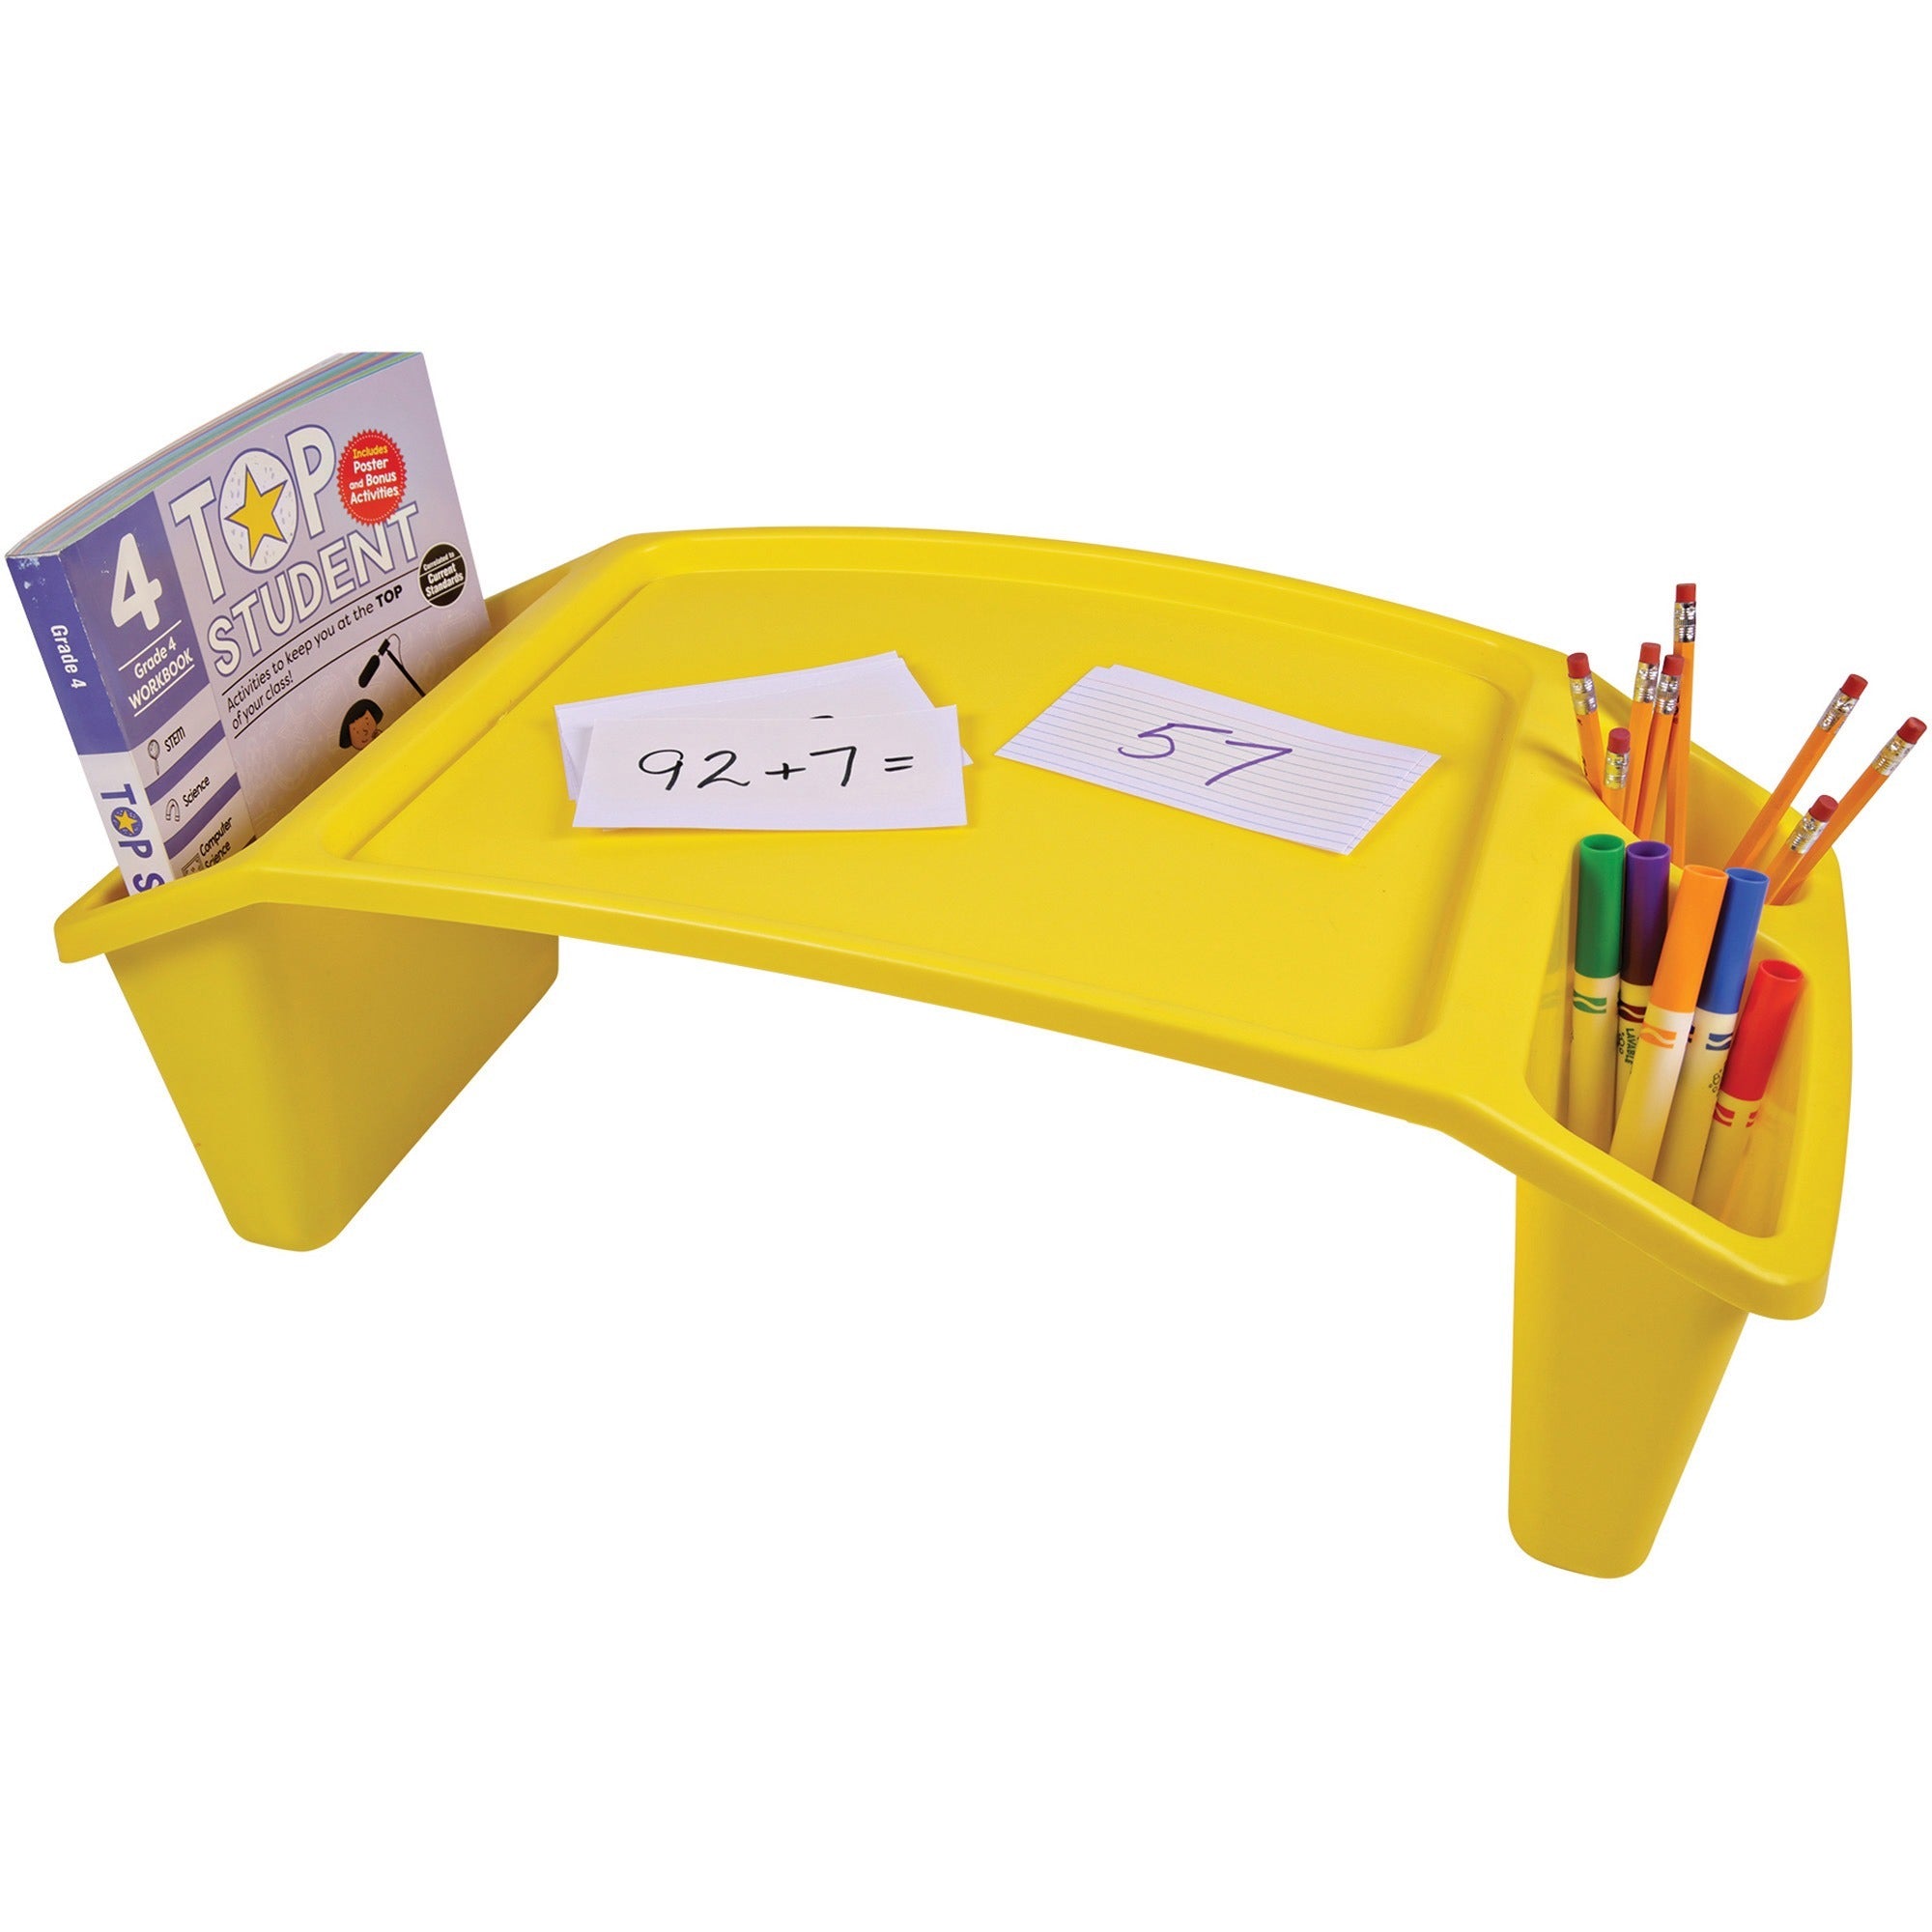 deflecto-antimicrobial-kids-lap-tray-supplies-paper-book-pencil-crayon-mobile-device-decoration-activity-853height-x-2335width-x-12depth-yellow-polypropylene-plastic_def39502yel - 1